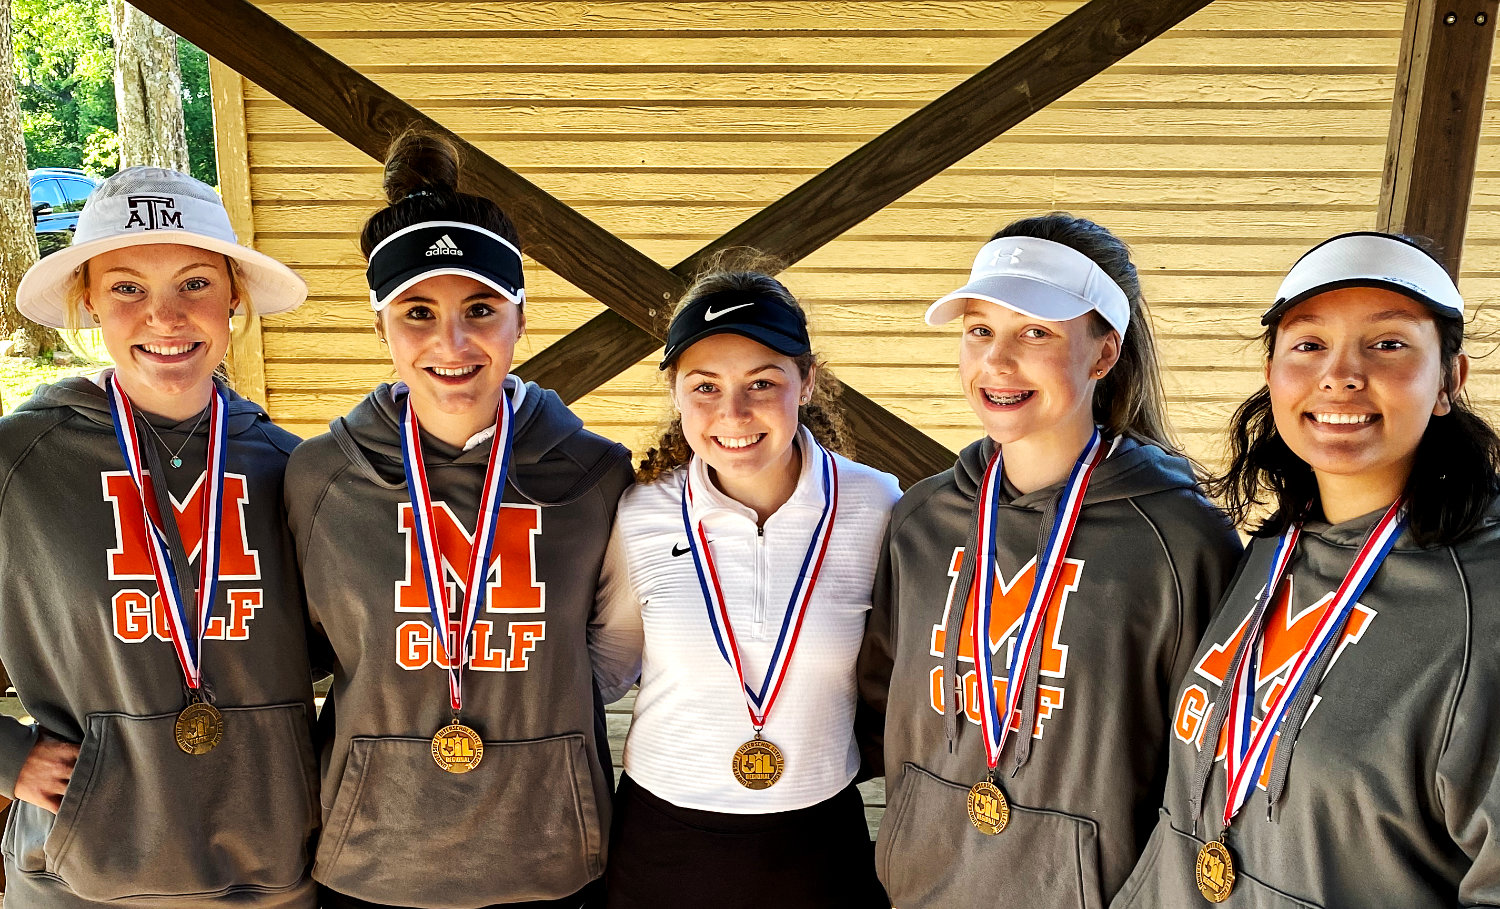 The third place 2-3A Region golf team of Mineola consists of, from left, Ava Johnson, Valerie Moreland, Sunni Ruffin, Allie Hooton and Savannah Lopez.